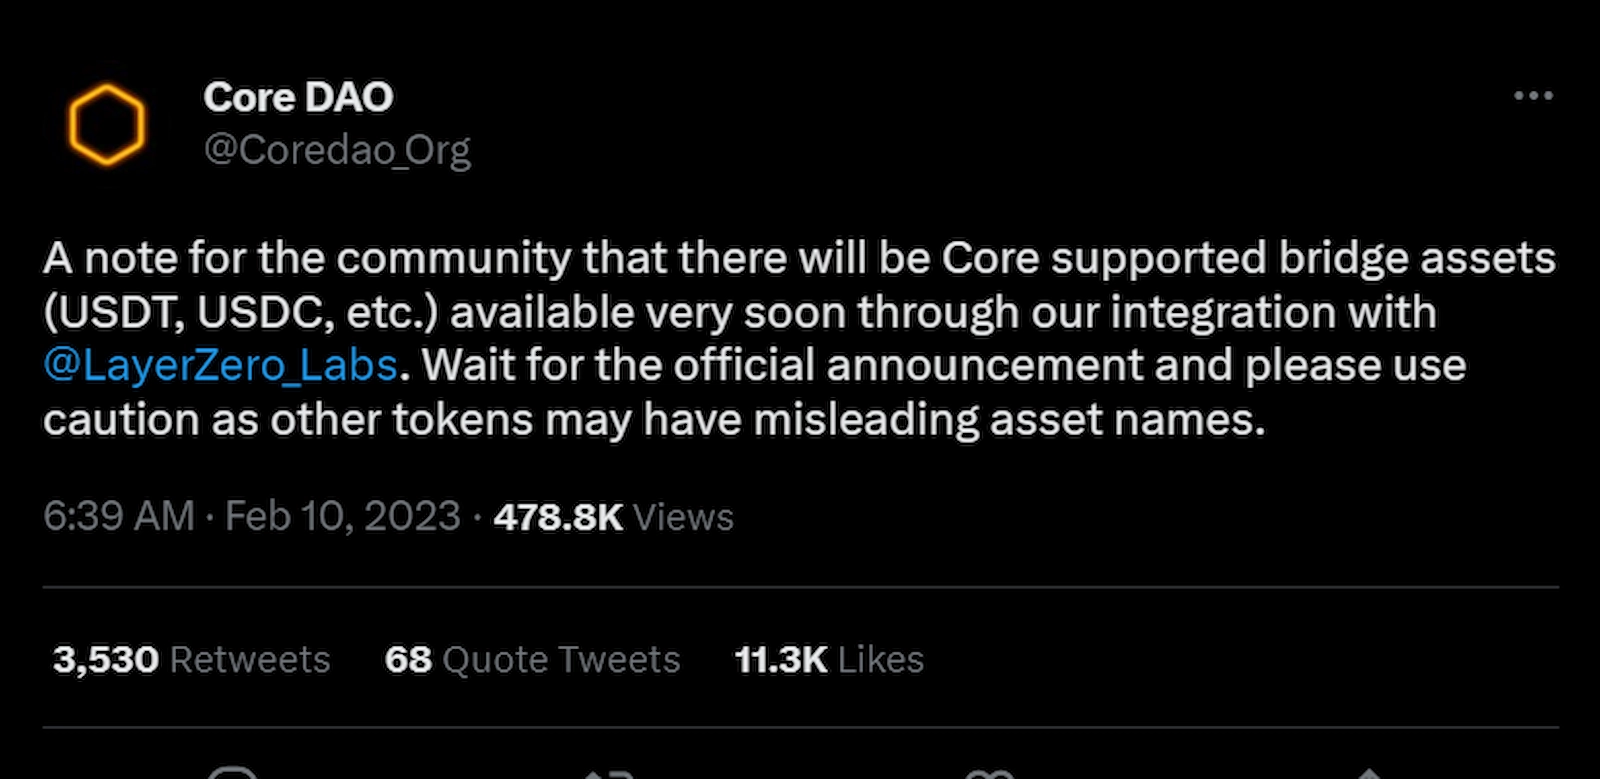 CoreDao announced support for bridge assets on its mainnet.